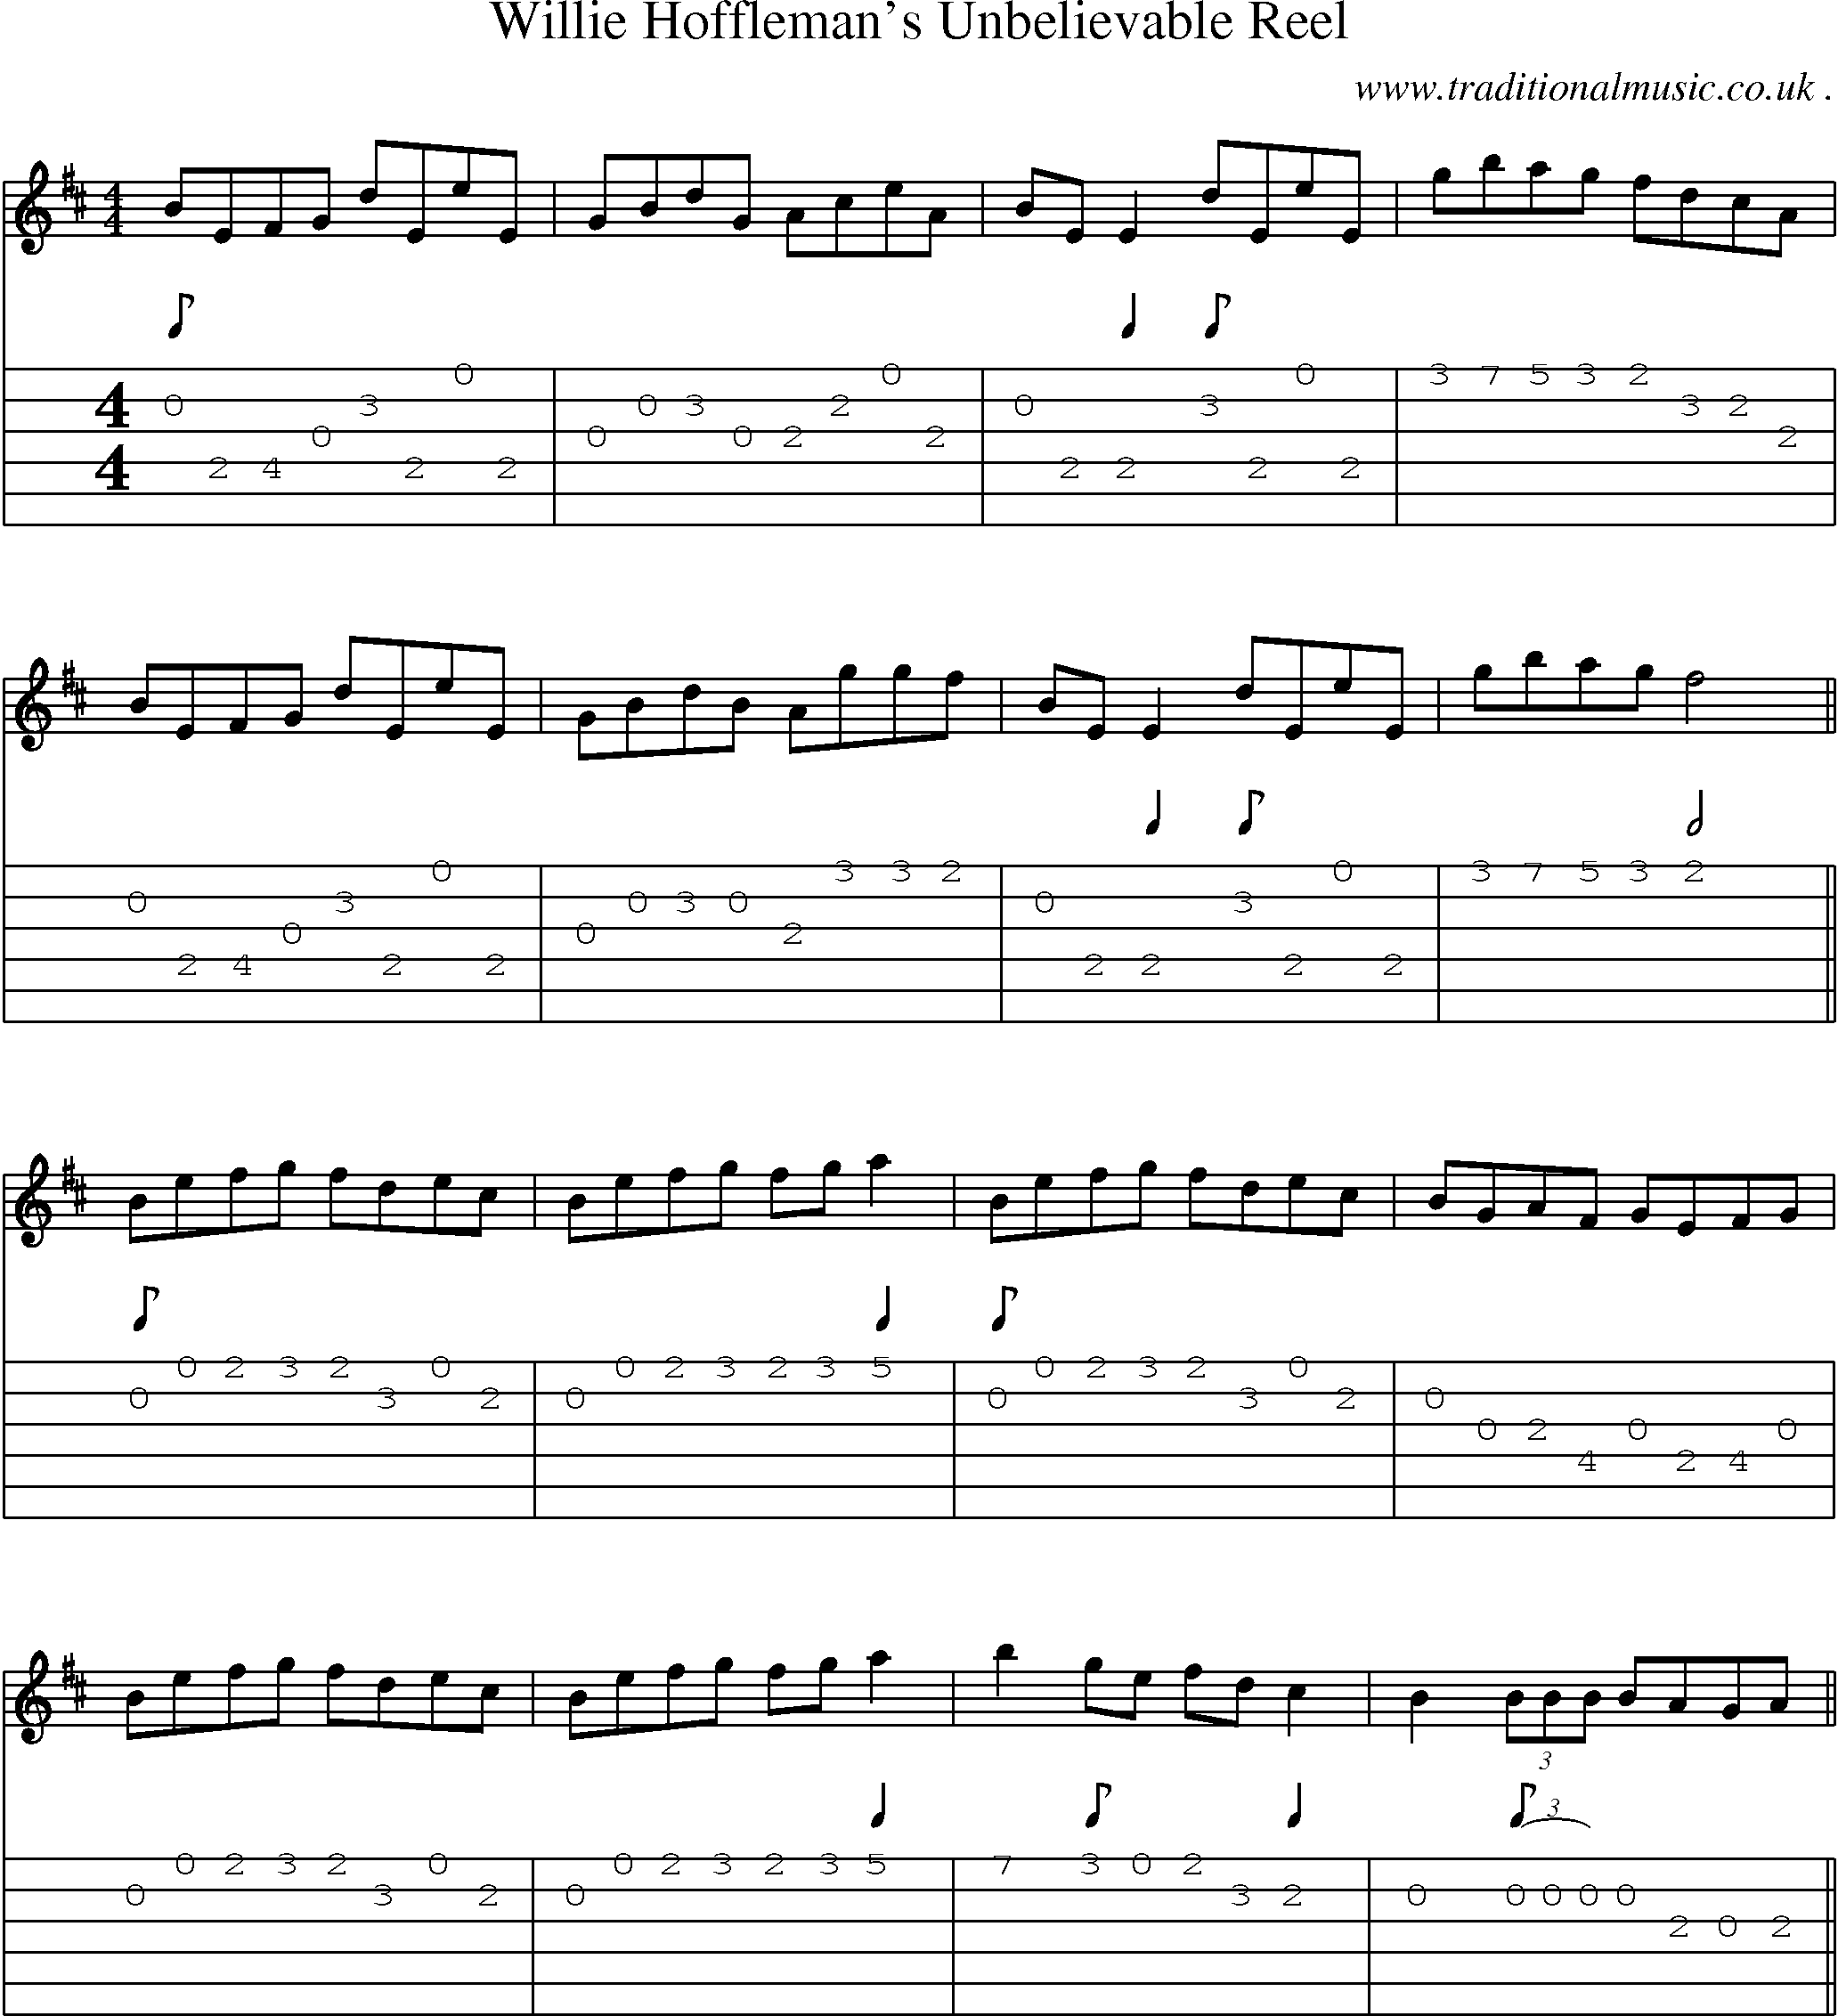 Sheet-Music and Guitar Tabs for Willie Hofflemans Unbelievable Reel